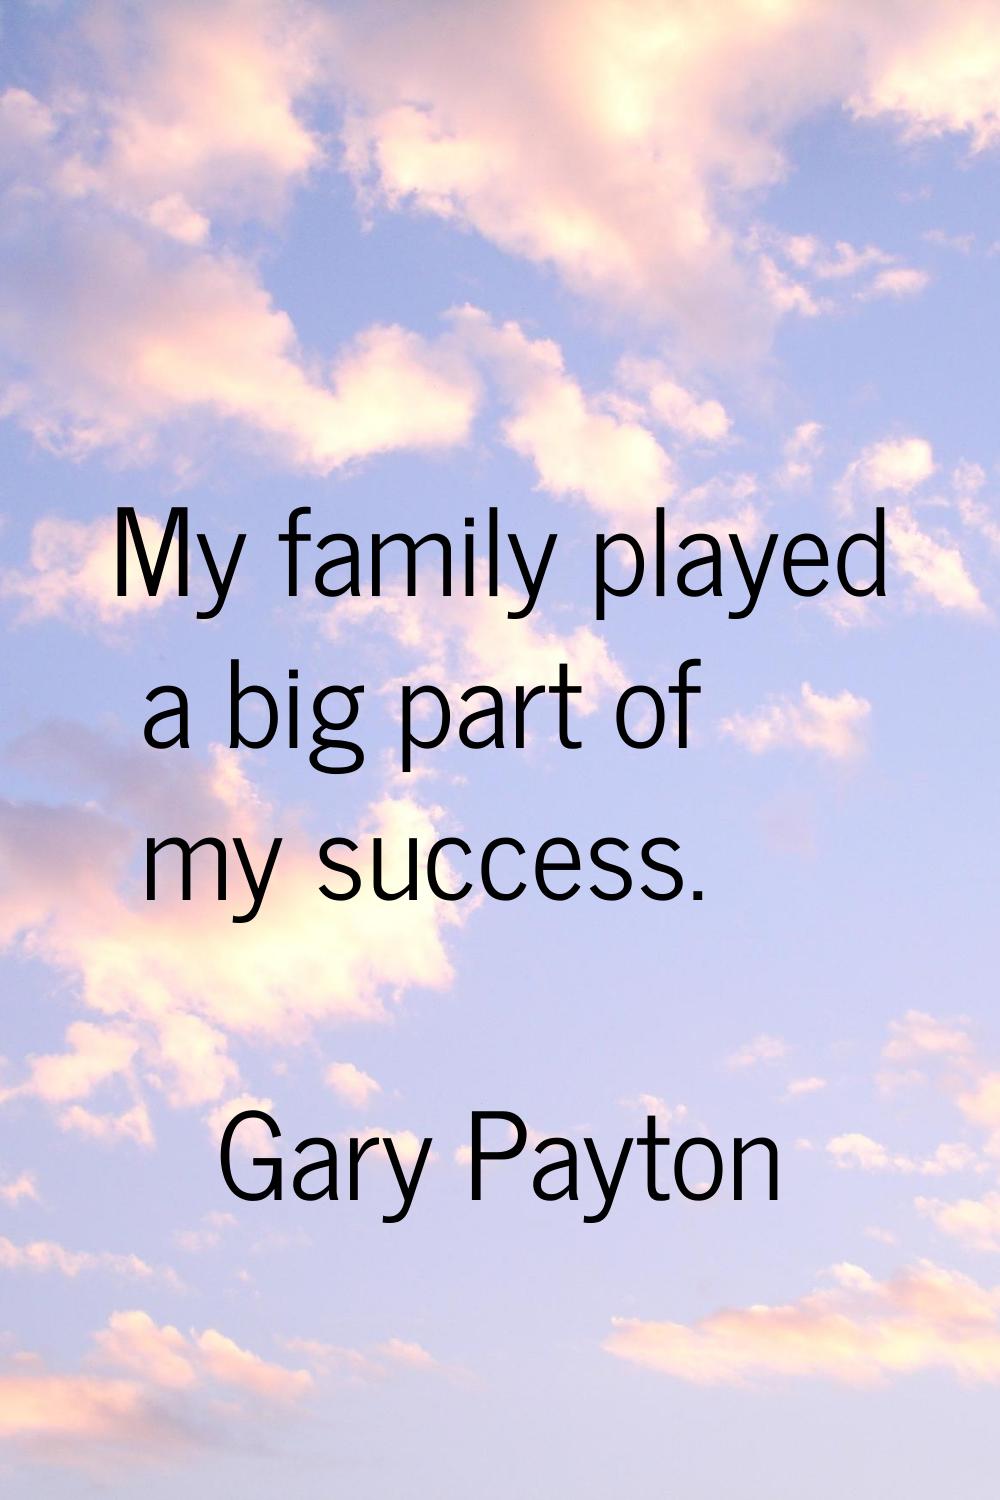 My family played a big part of my success.